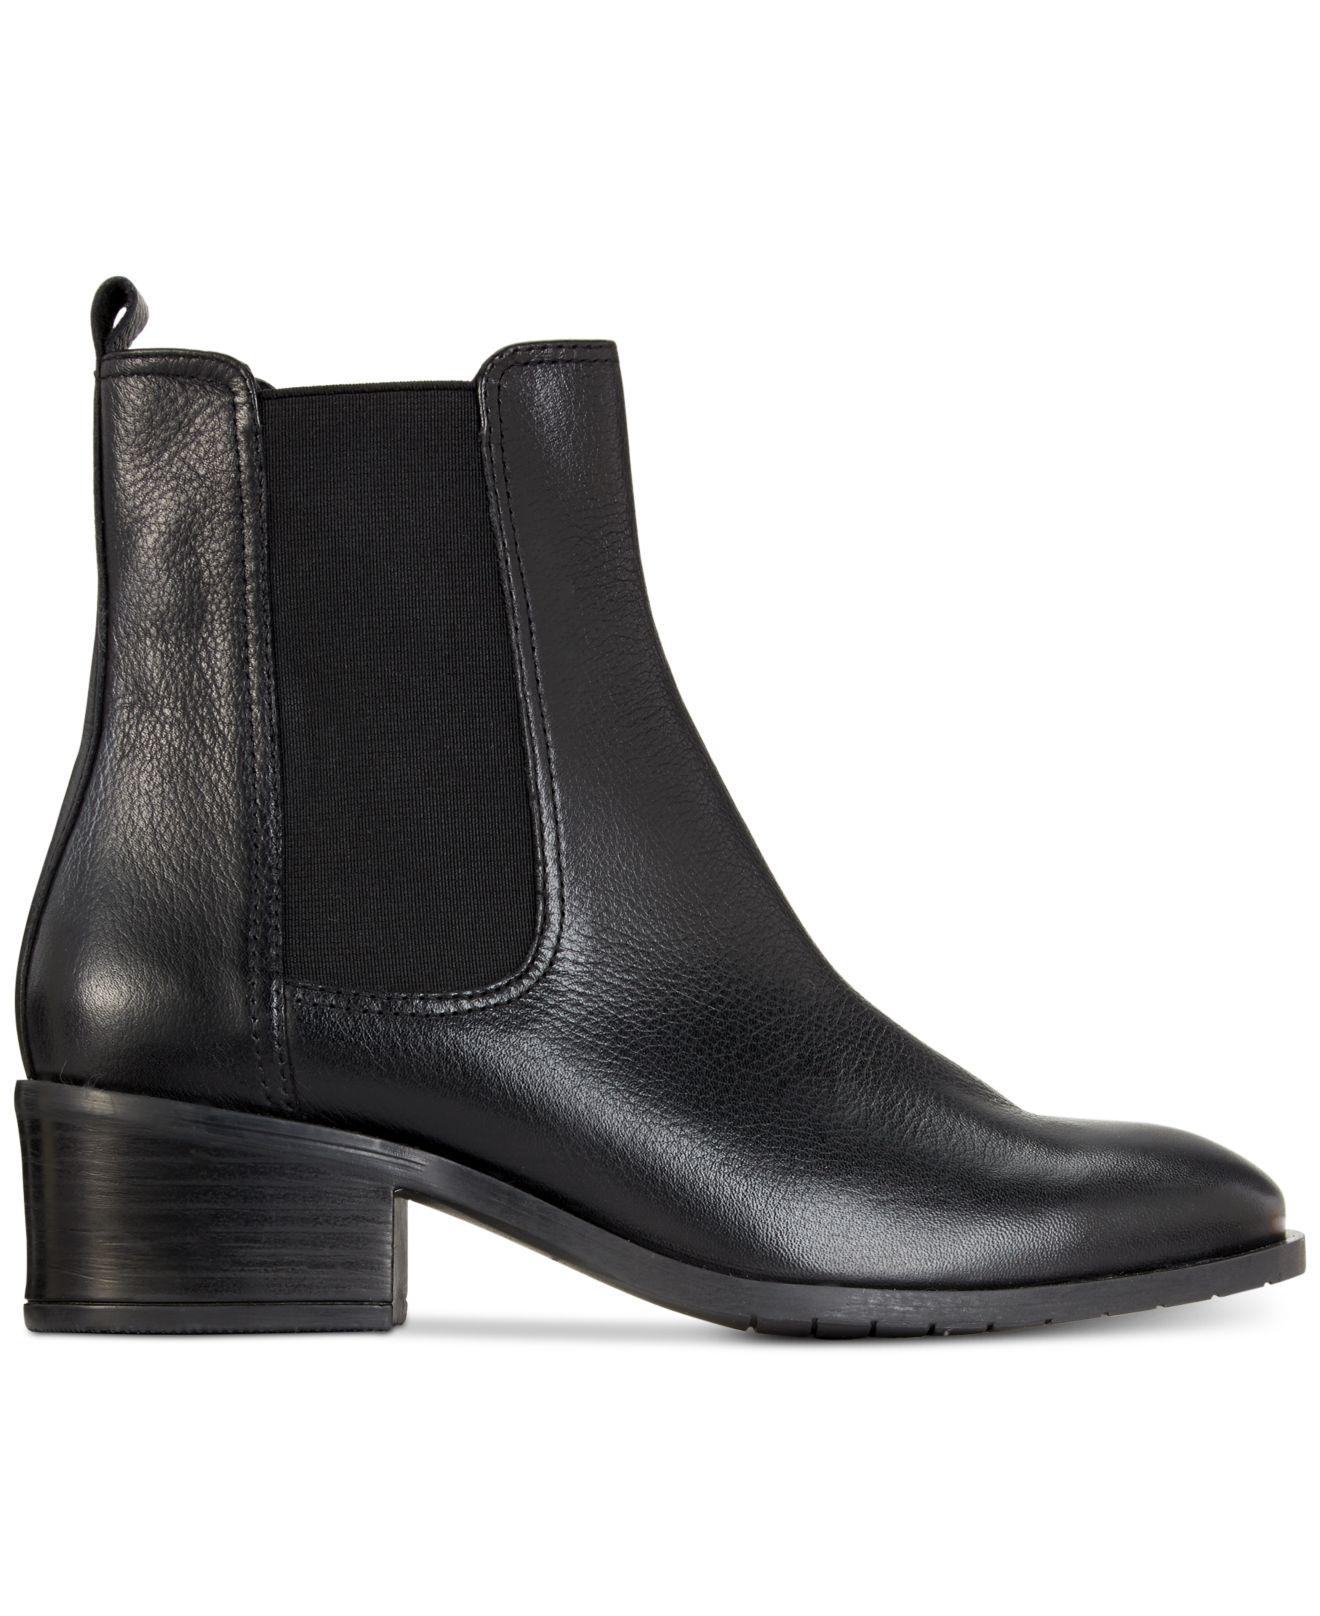 Kenneth Cole Reaction Leather Salt Chelsea Booties in Black - Save 69% ...